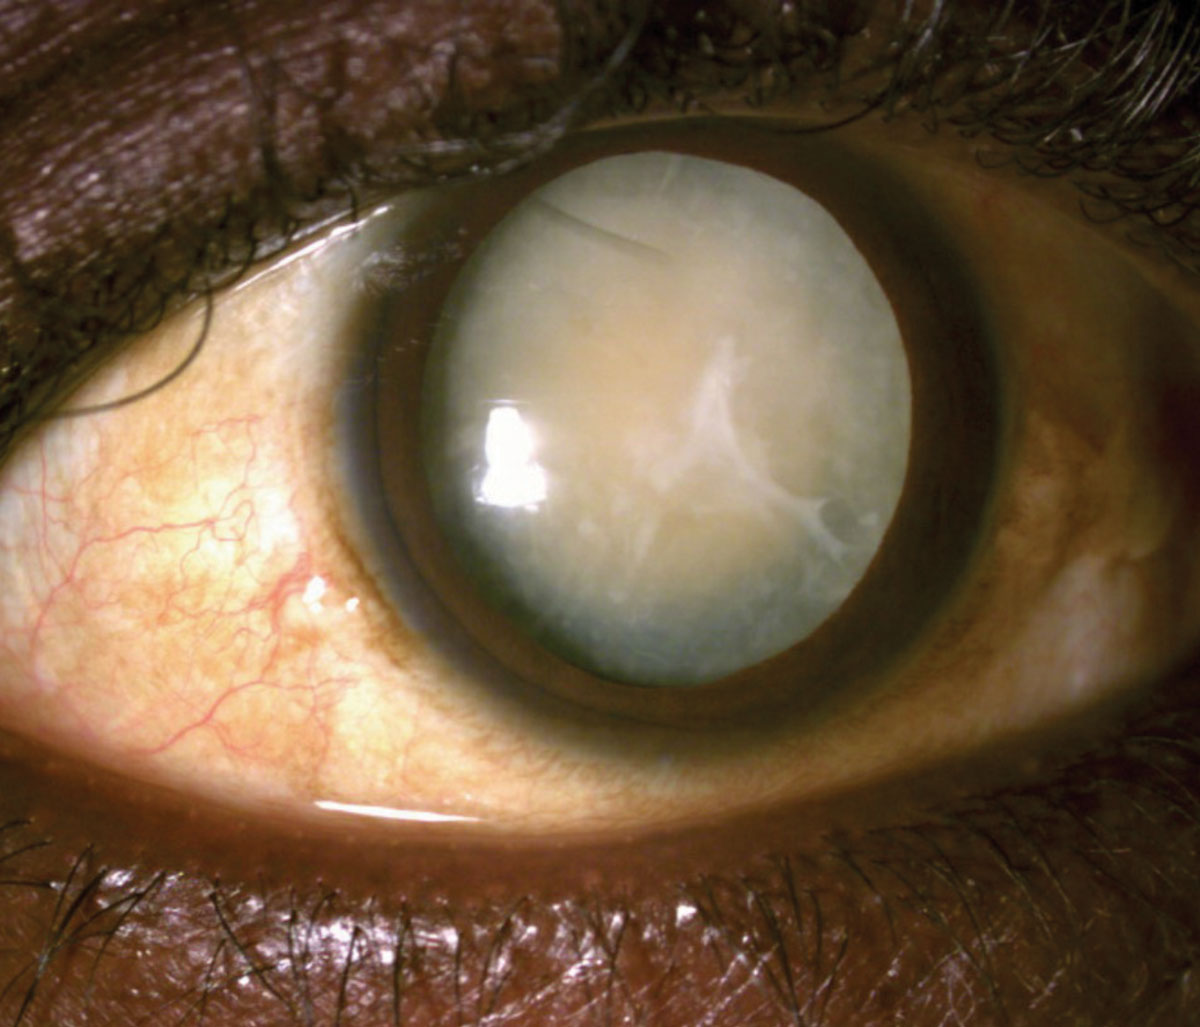 Americans with limited access to healthcare services are less likely to receive cataract surgery.